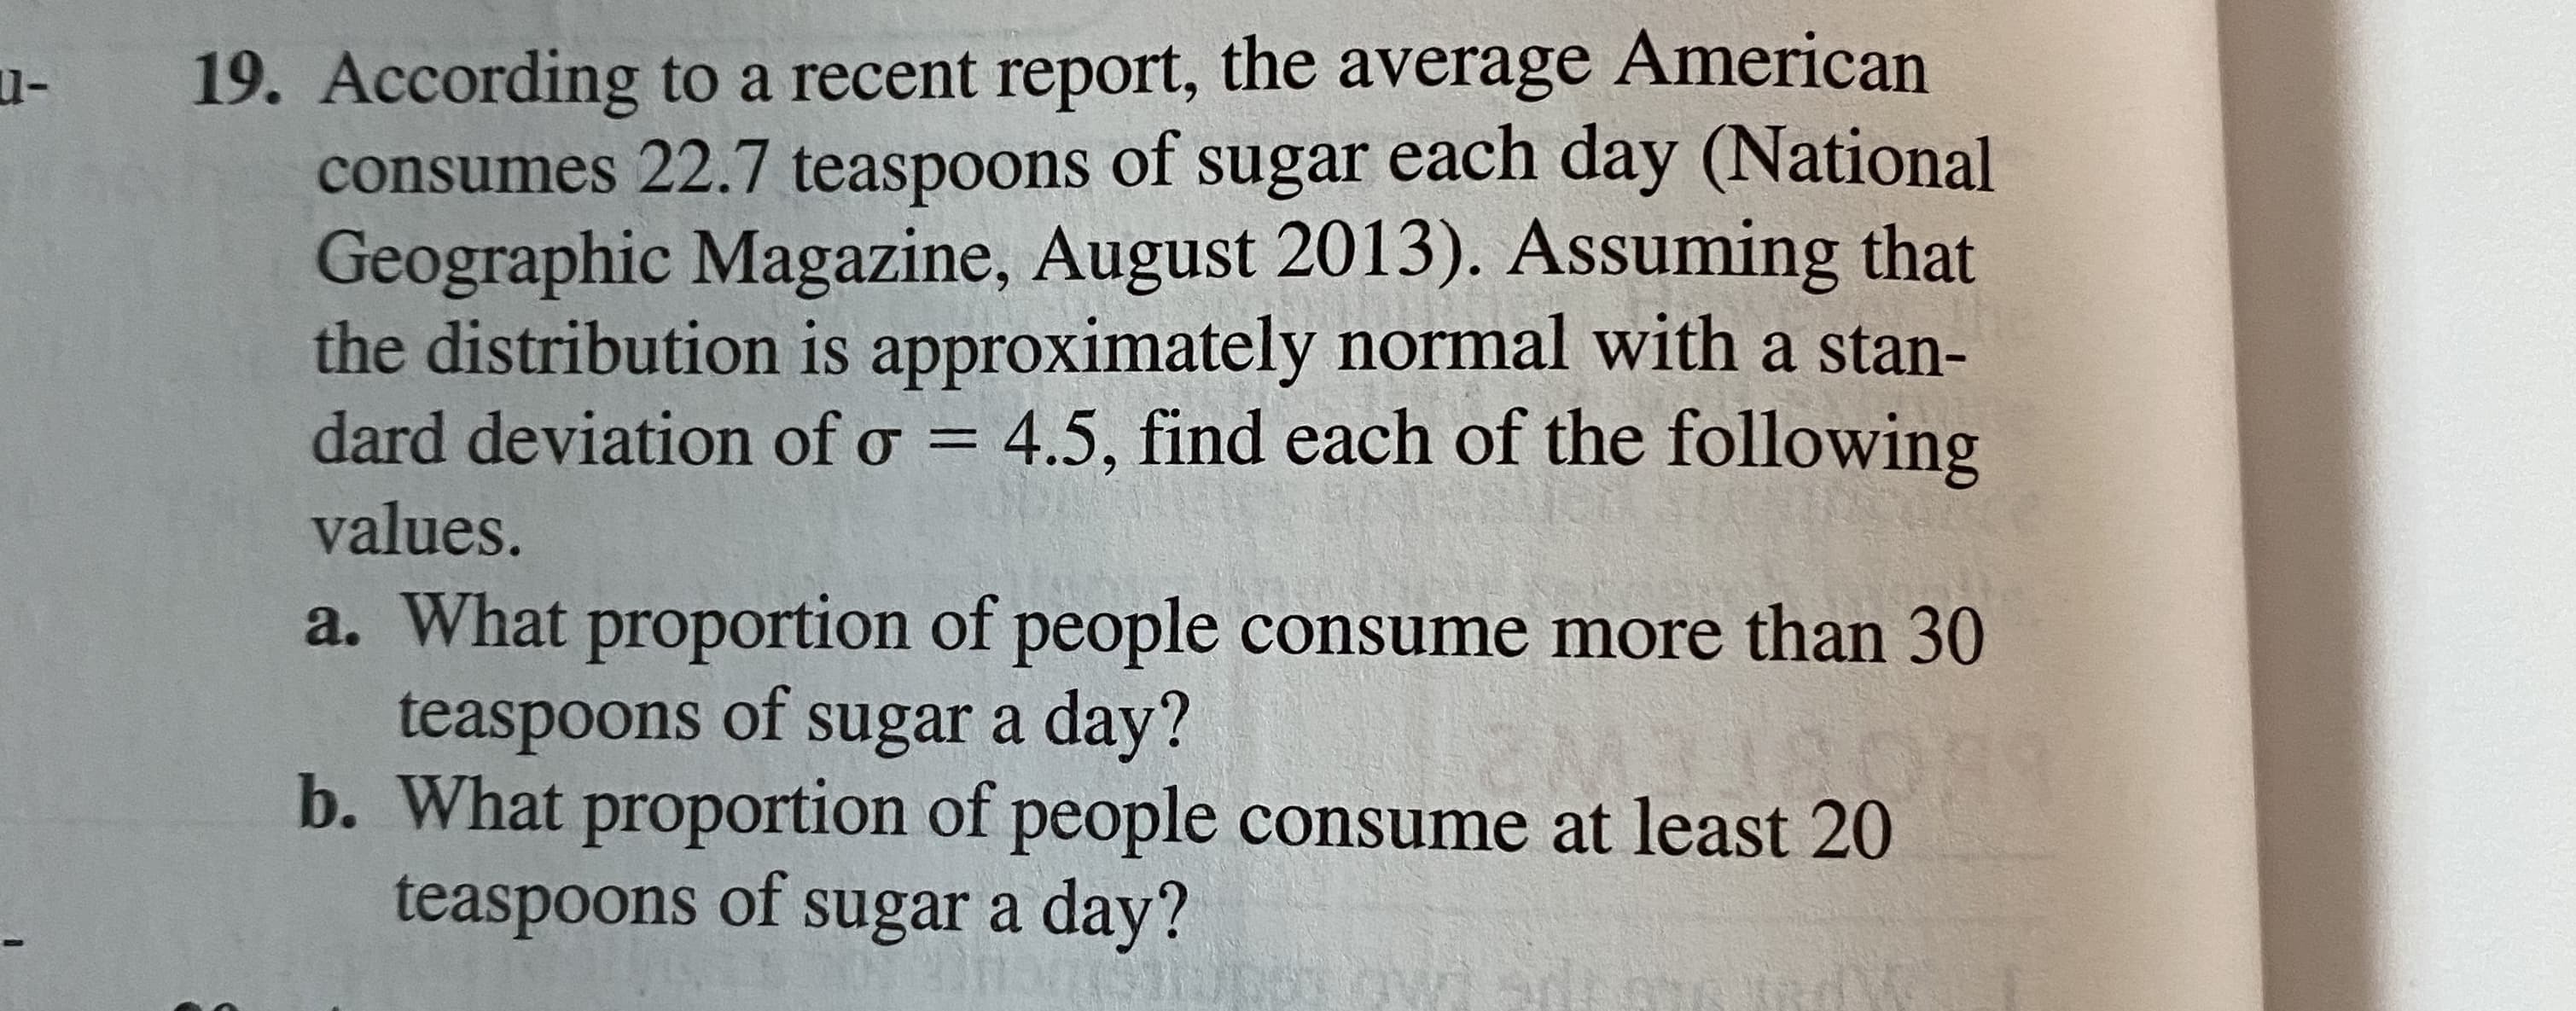 19. According to a recent report, the average American
consumes 22.7 teaspoons of sugar each day (National
Geographic Magazine, August 2013). Assuming that
the distribution is approximately normal with a stan-
dard deviation of o = 4.5, find each of the following
values.
a. What proportion of people consume more than 30
teaspoons of sugar a day?
b. What proportion of people consume at least 20
teaspoons of sugar a day?
